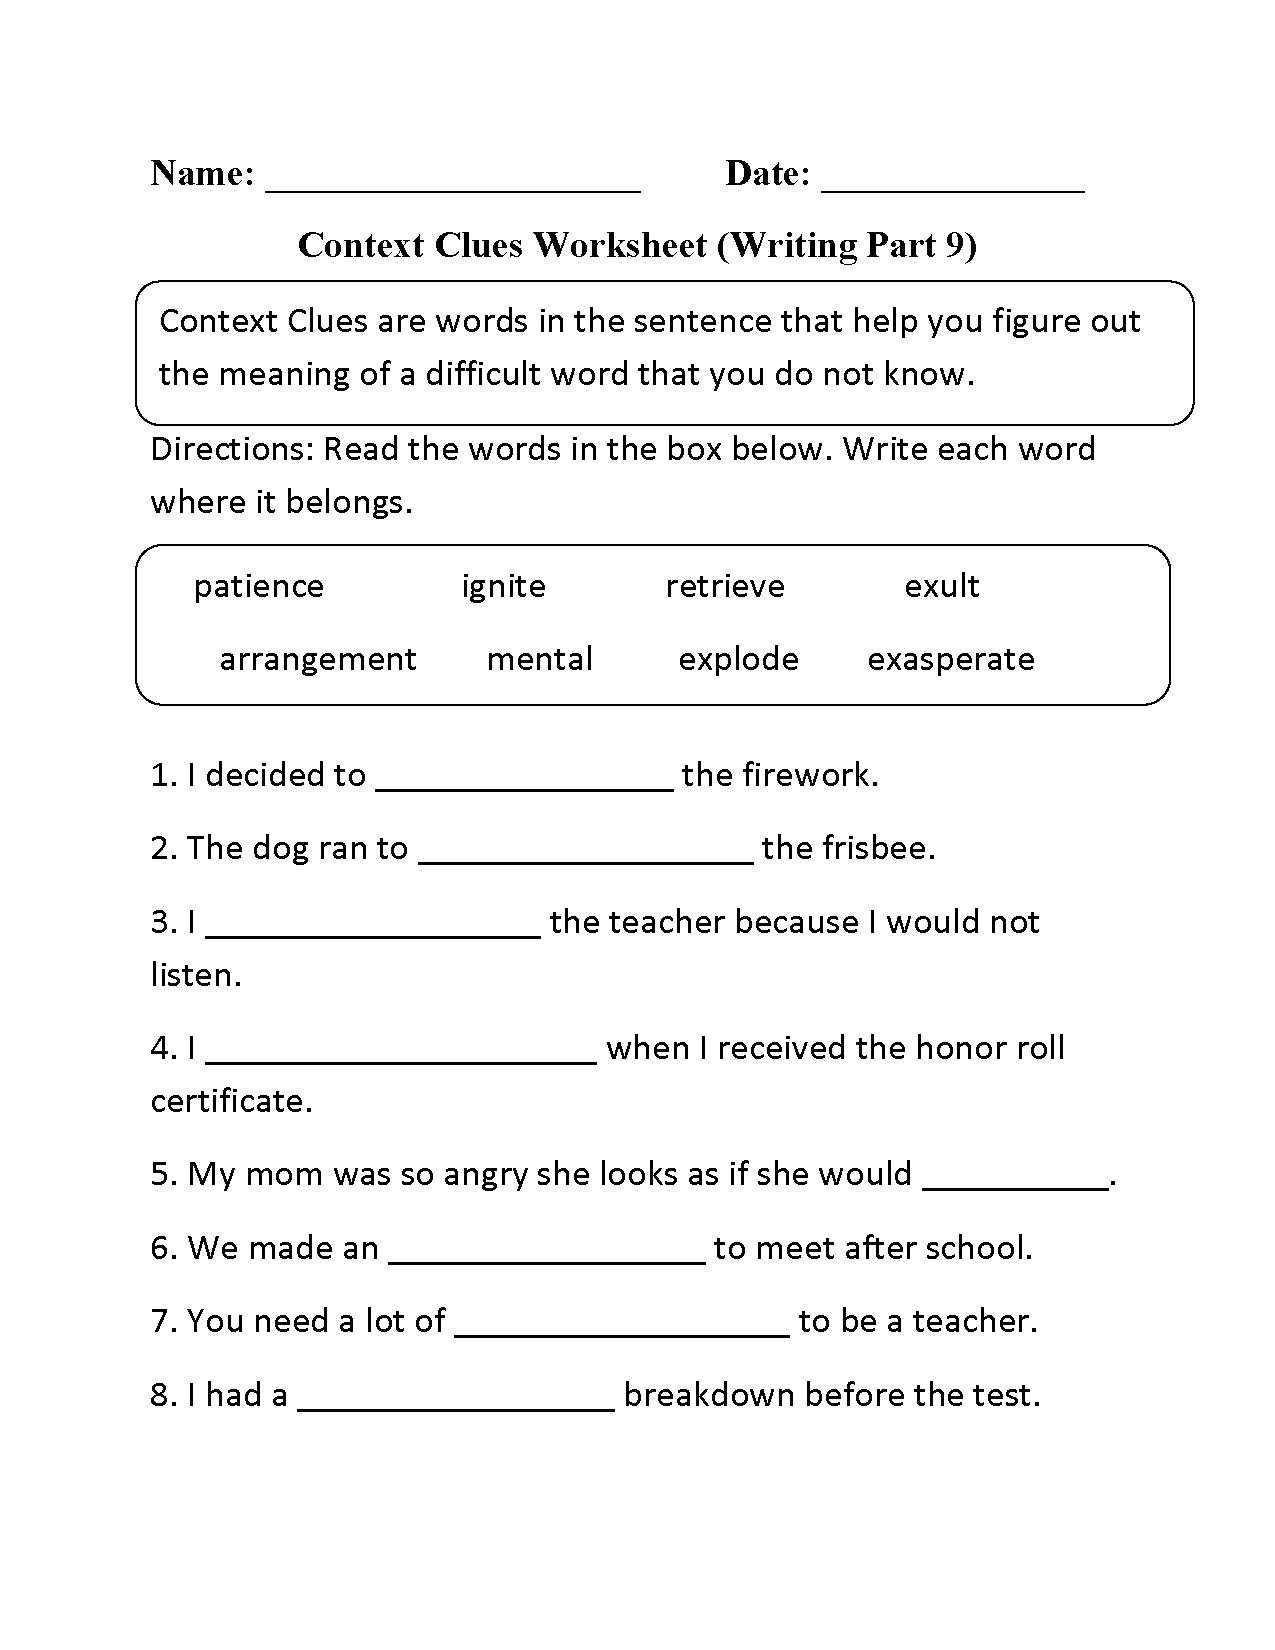 Context Clues Free Printable Worksheets